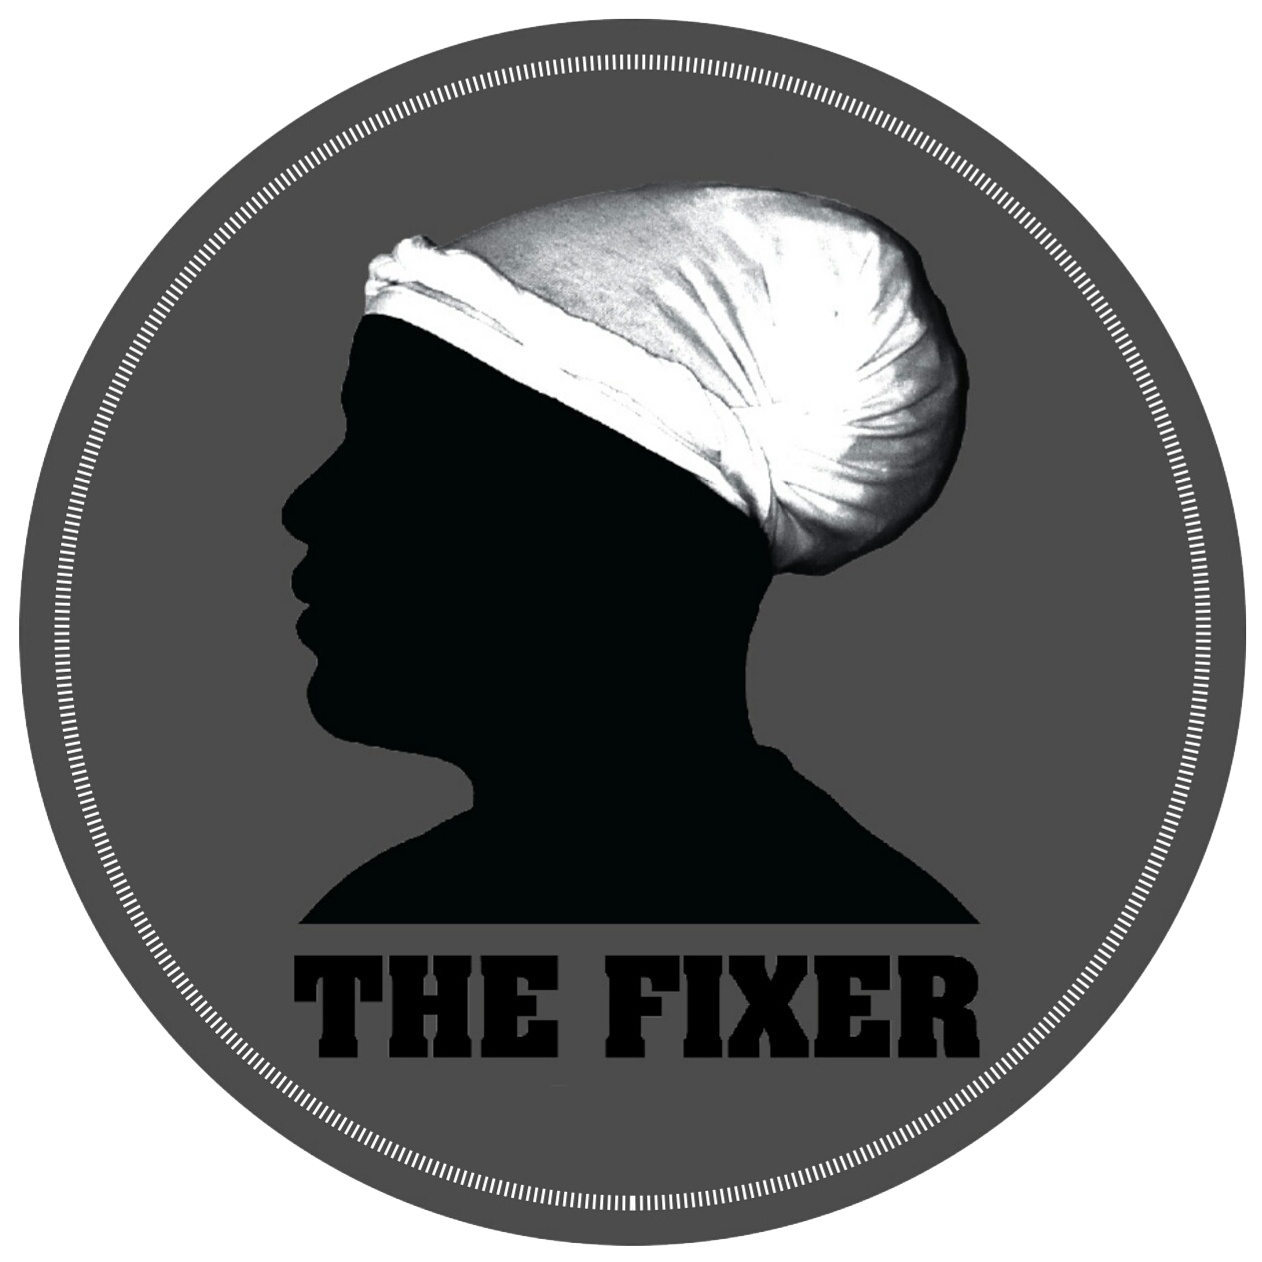 ARE YOU A FIXER?